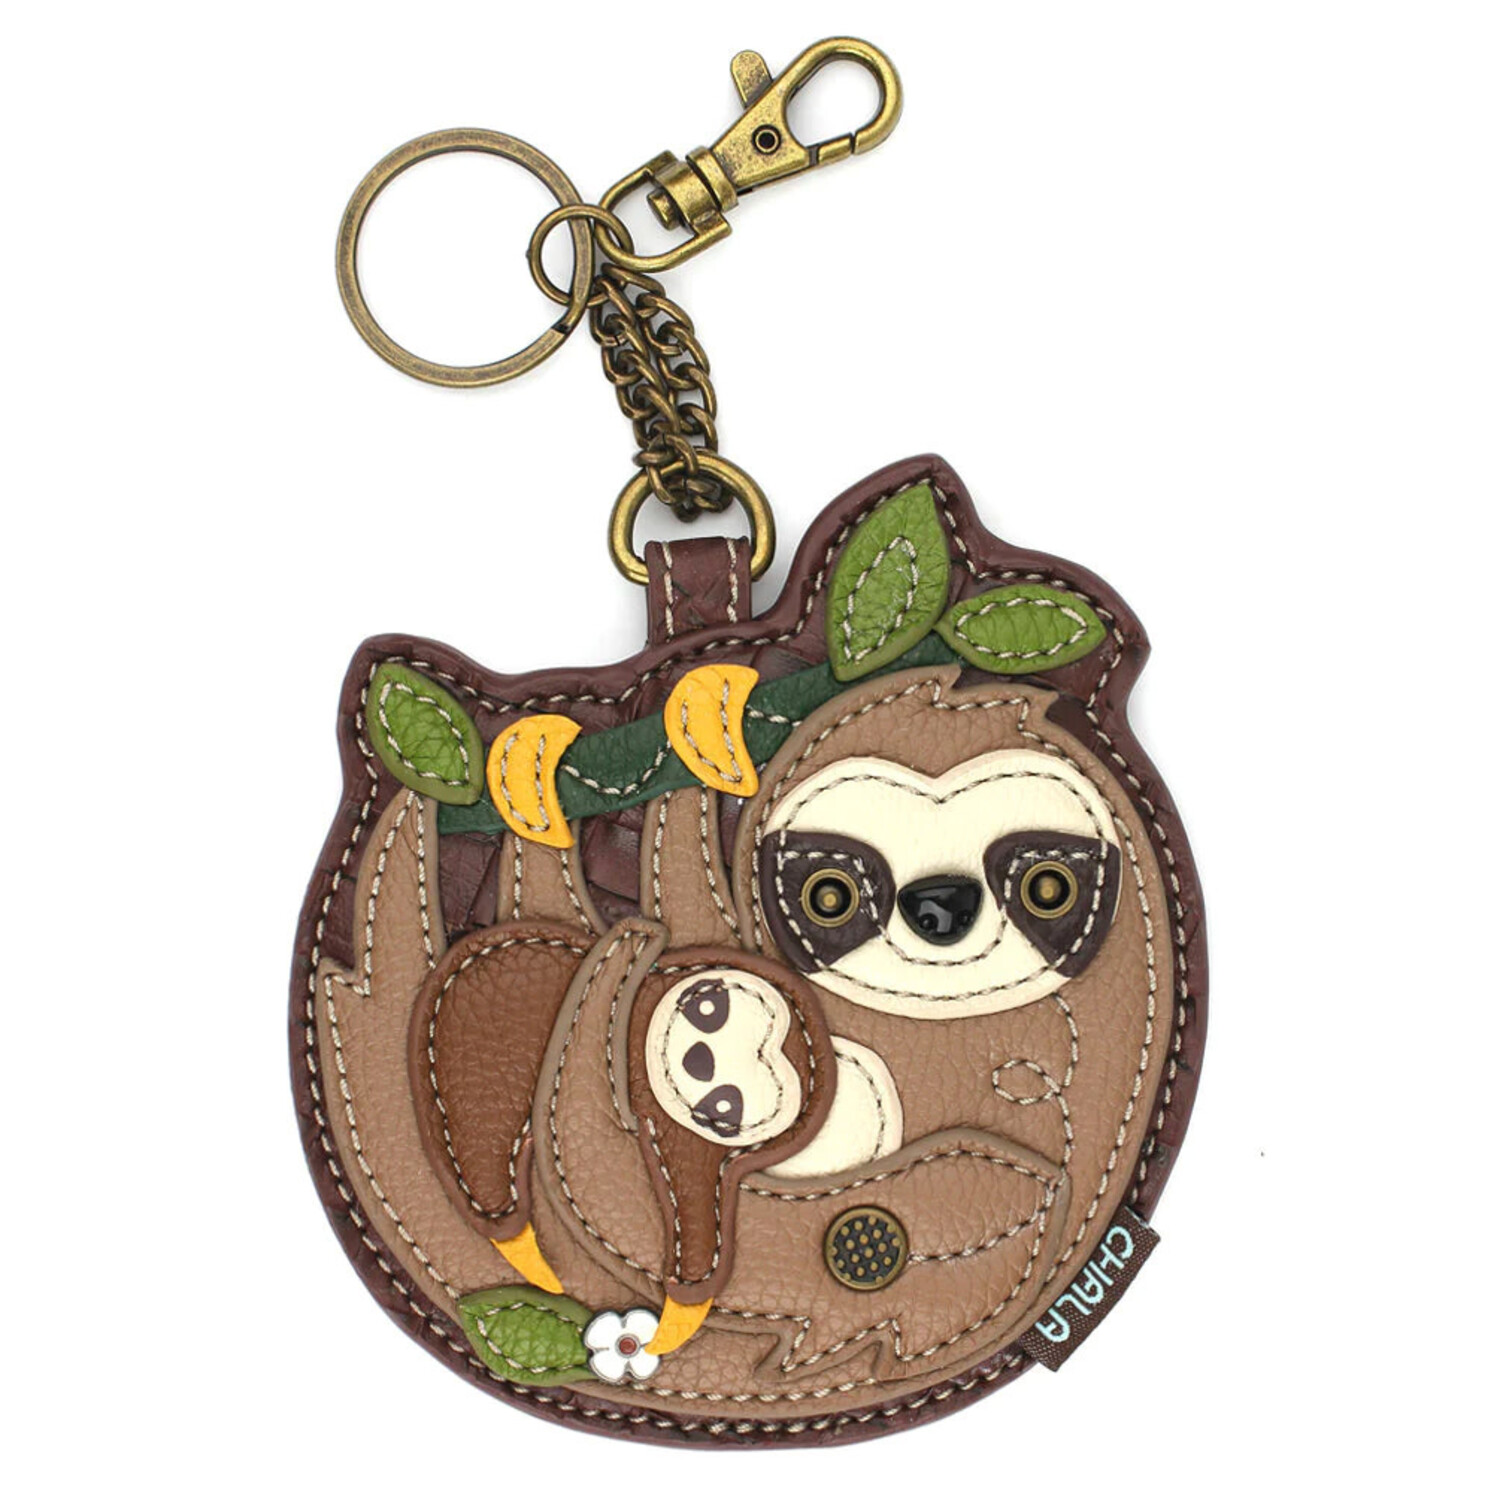 Chala Coin Purse/Key Fob, Lazzy Cat